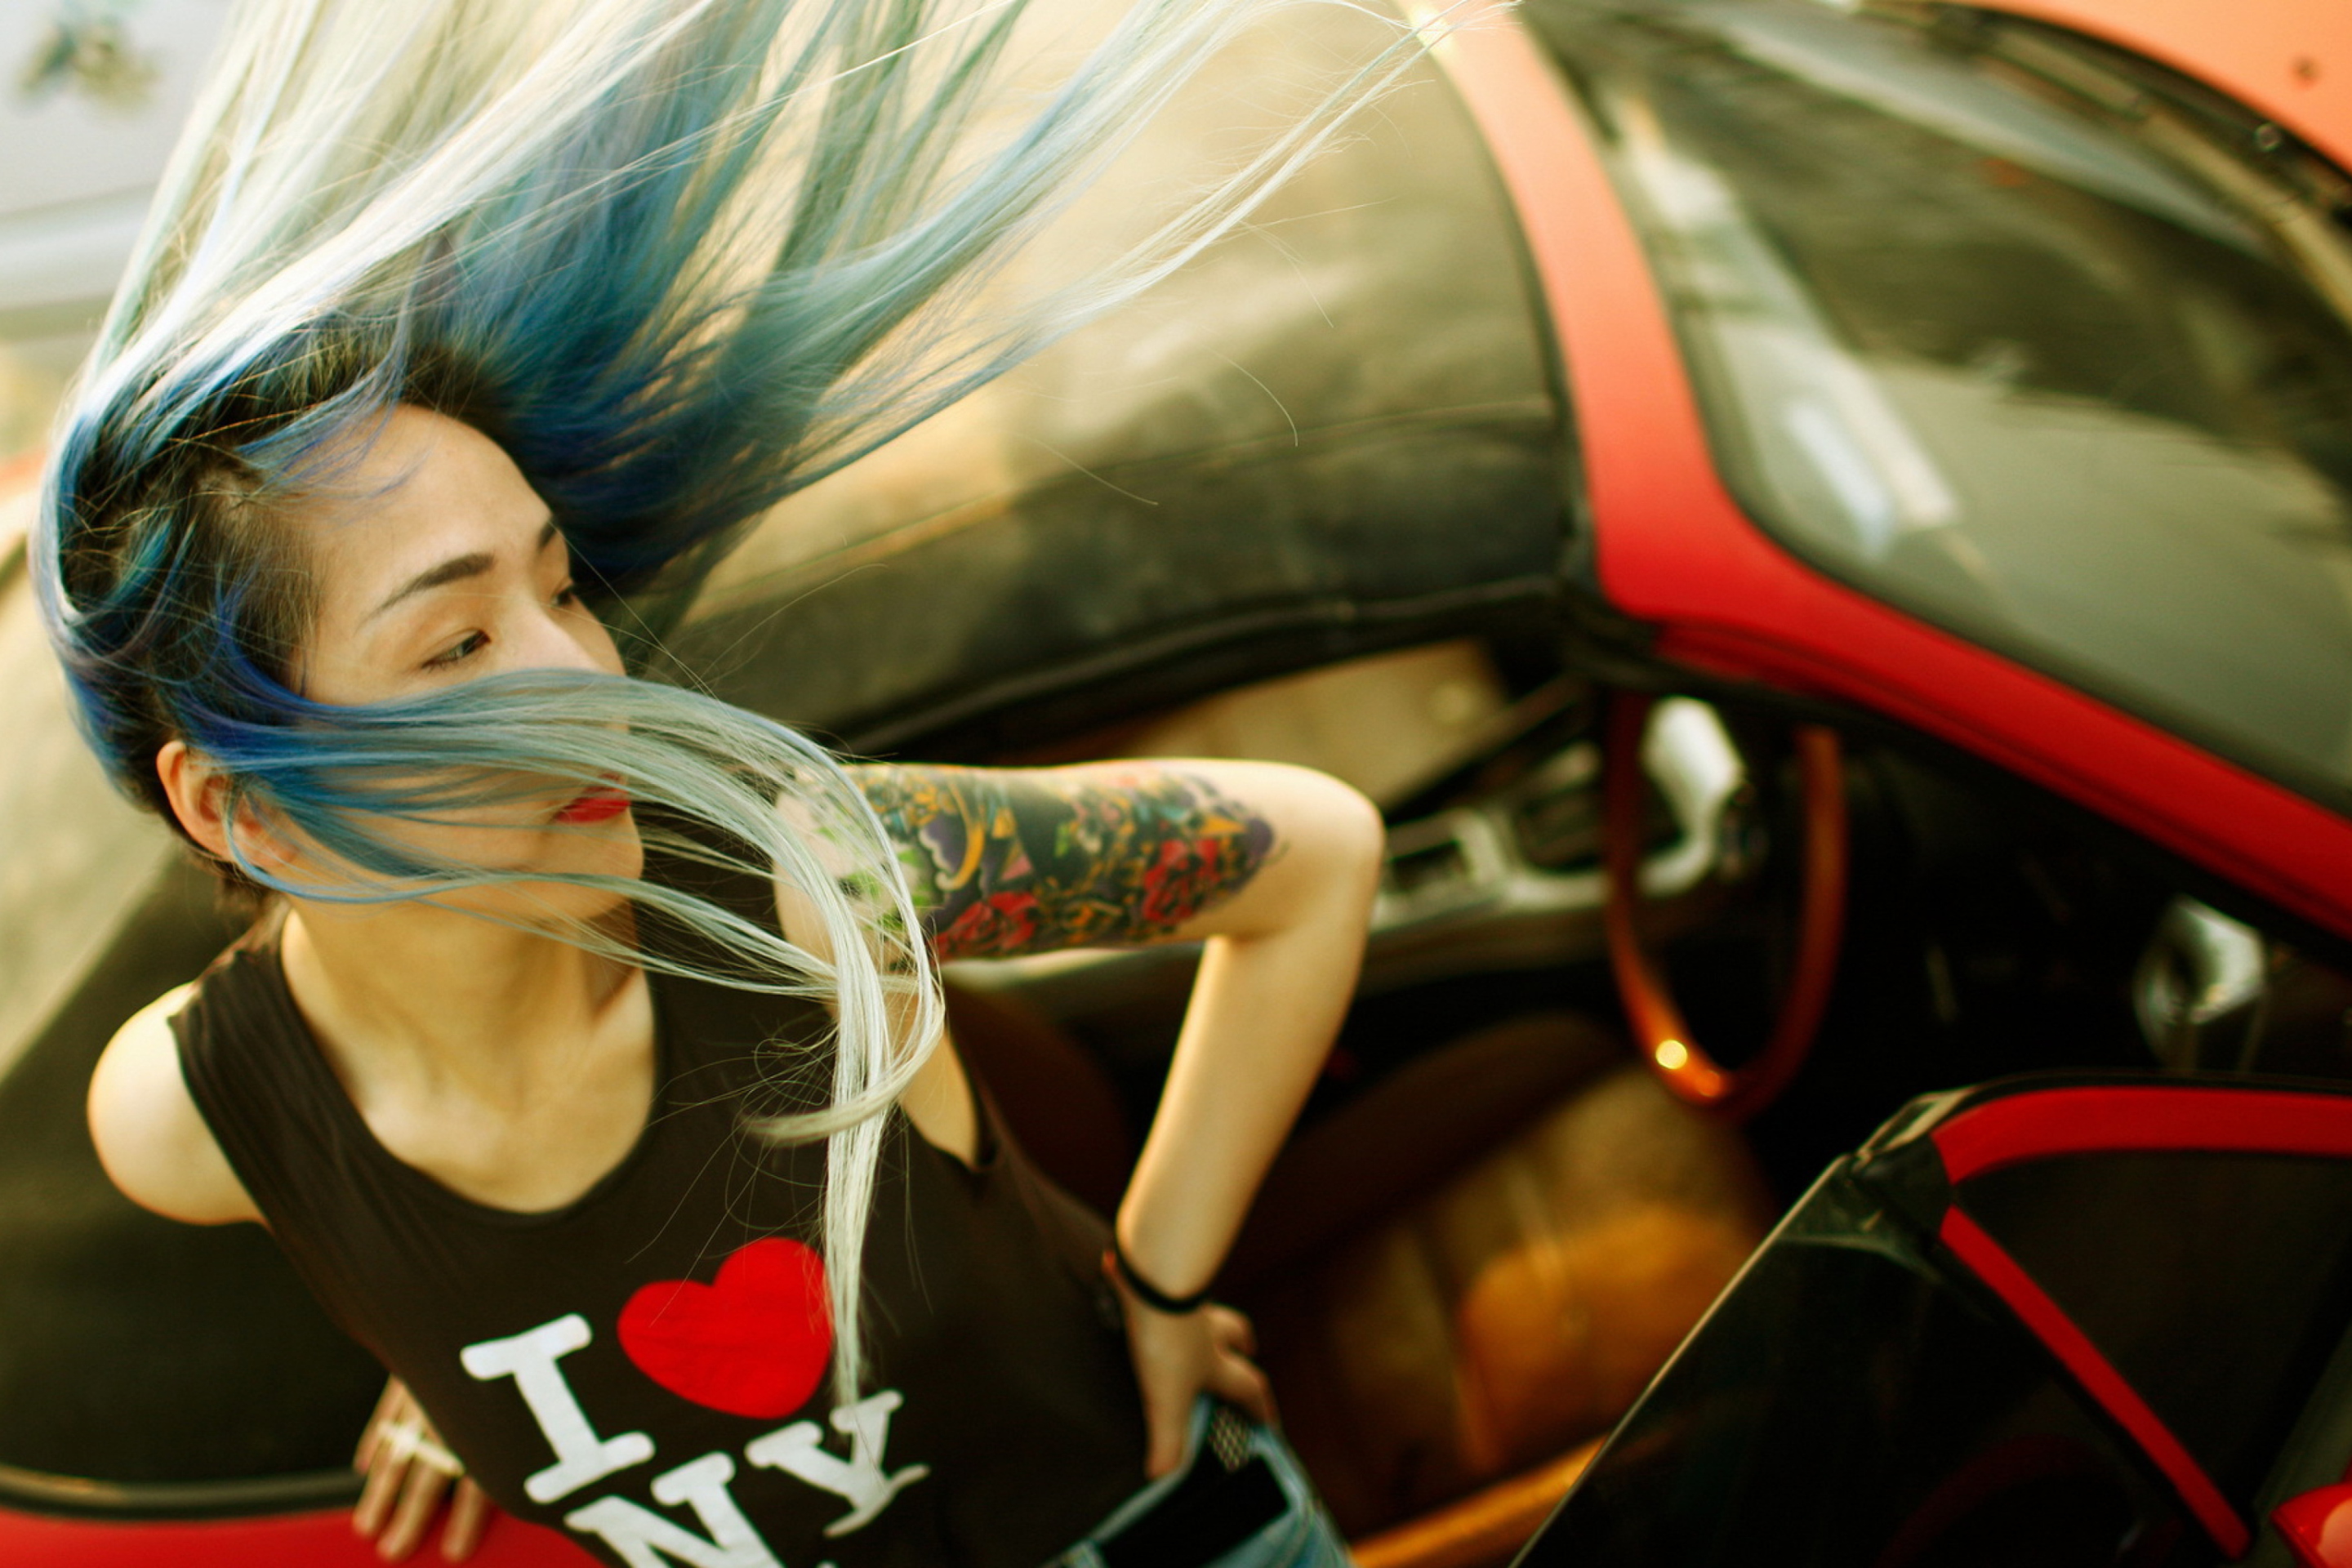 Das Cool Asian Girl With Blue Hair & I Love NY T-shirt Wallpaper 2880x1920